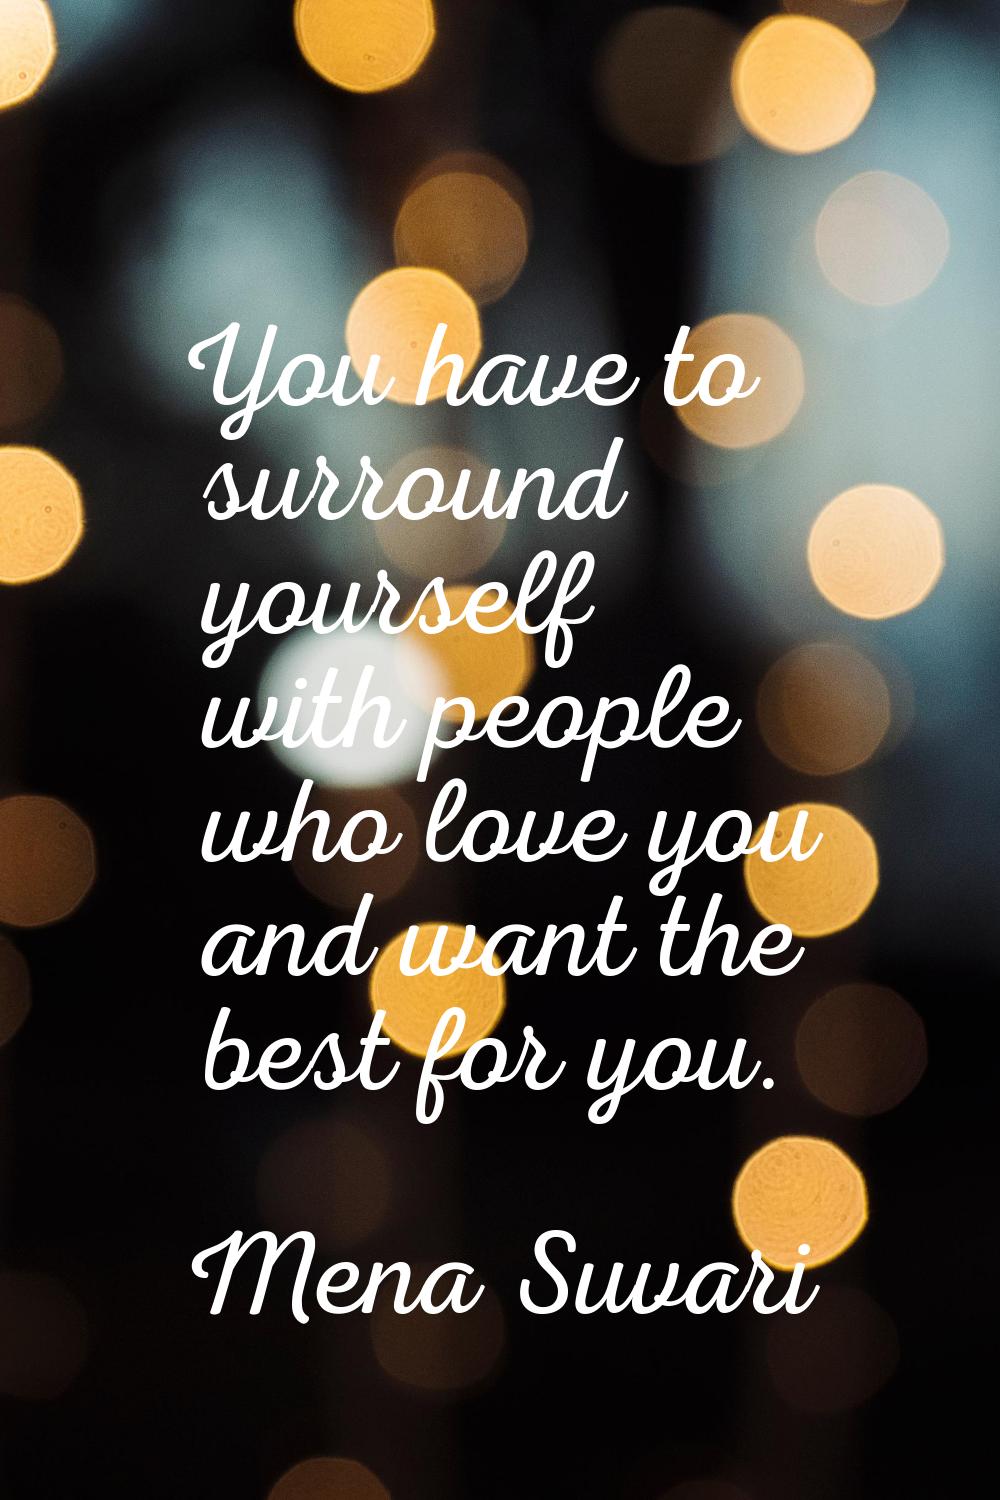 You have to surround yourself with people who love you and want the best for you.